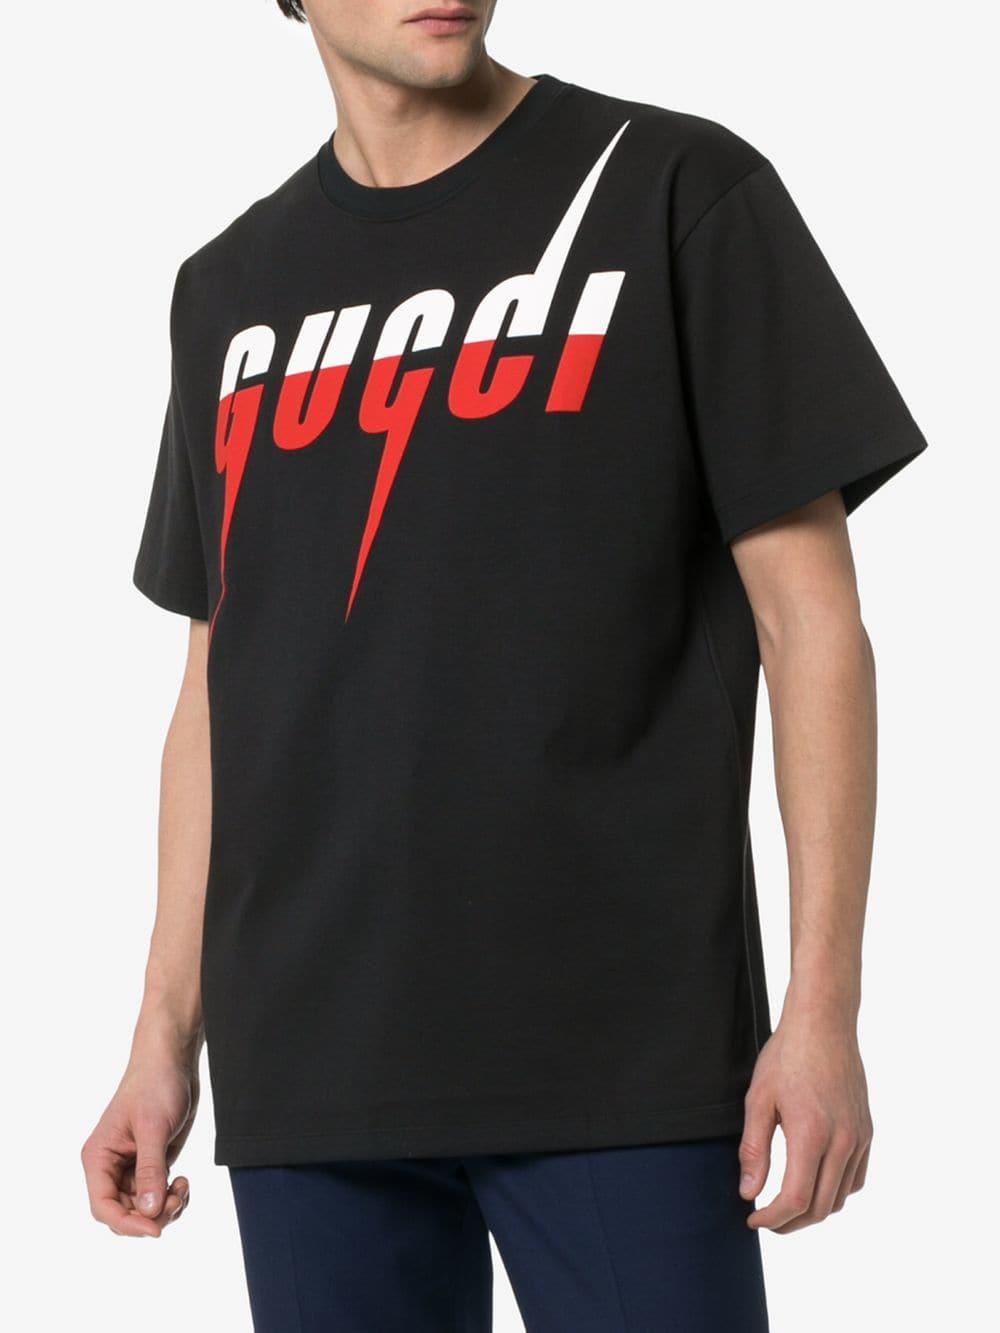 black and red gucci shirt